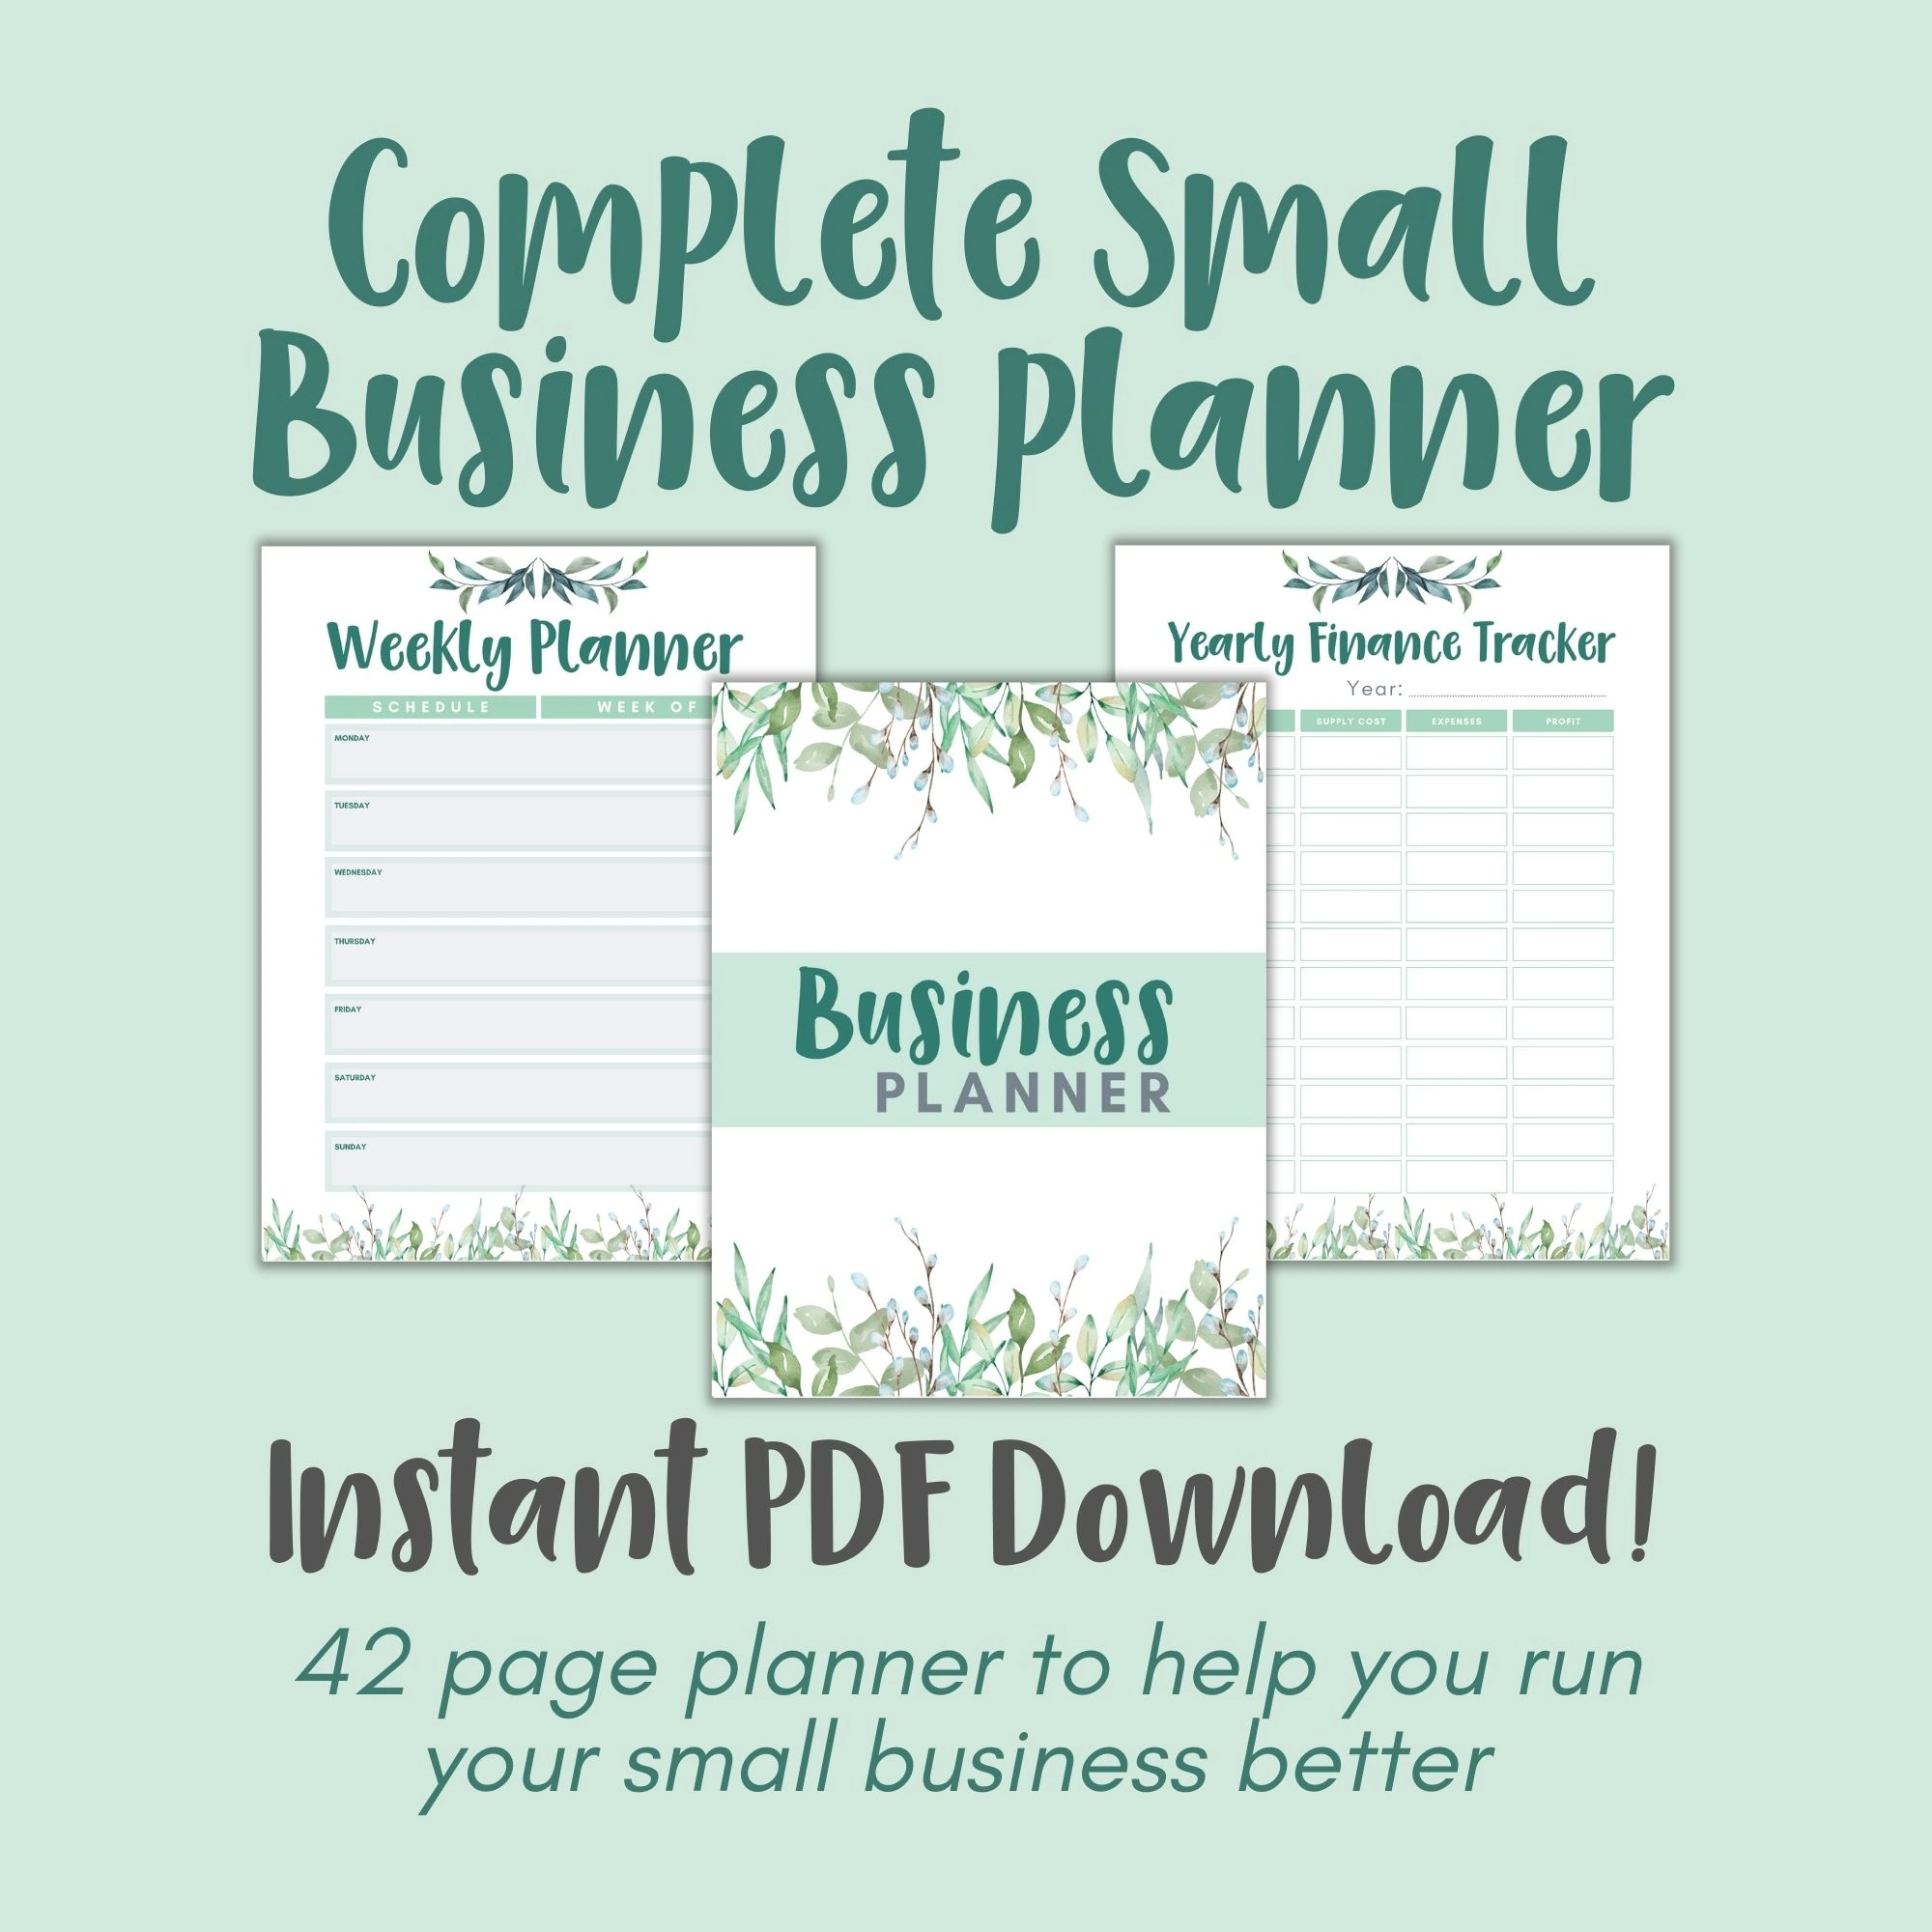 Small Business Planner Worksheets on a green background.